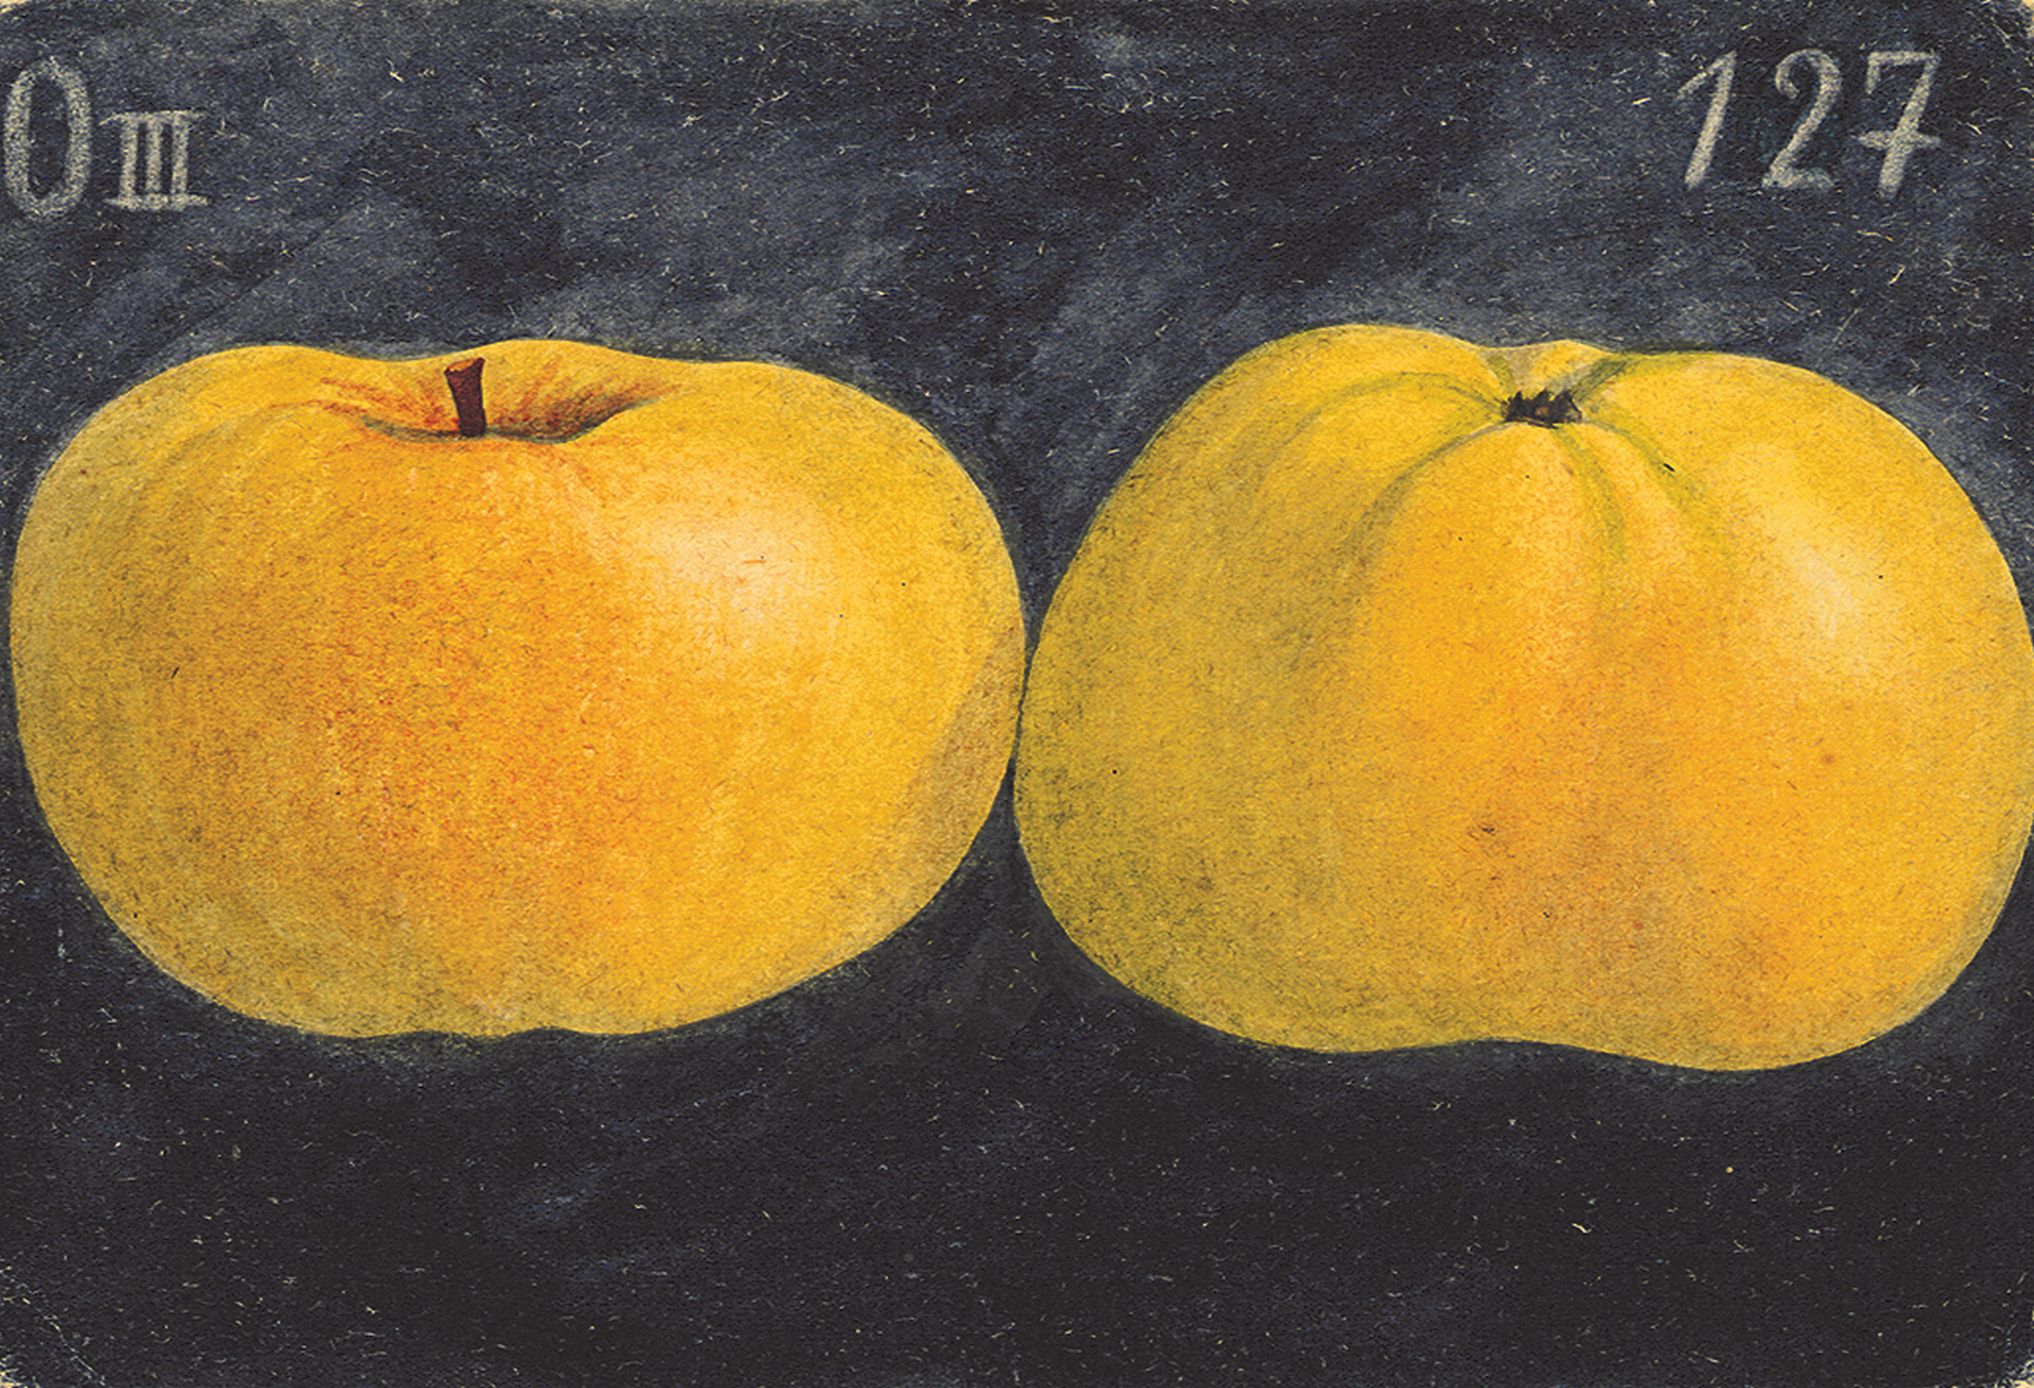 renette showing two yellow apples